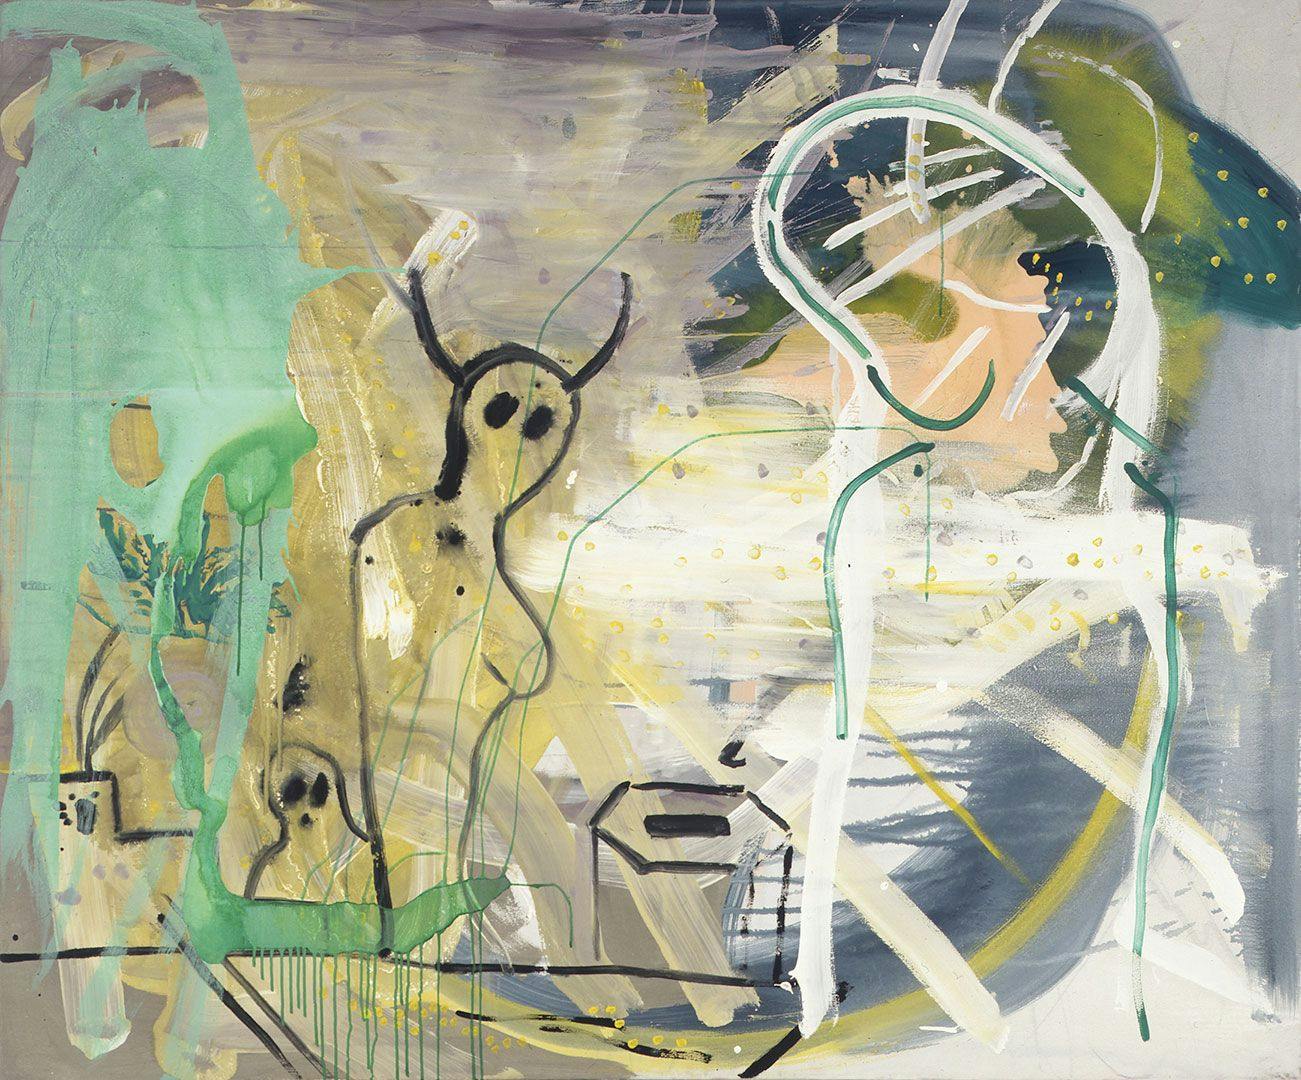 A painting by Sigmar Polke titled Gespenst, translated as Ghost, dated 1982.